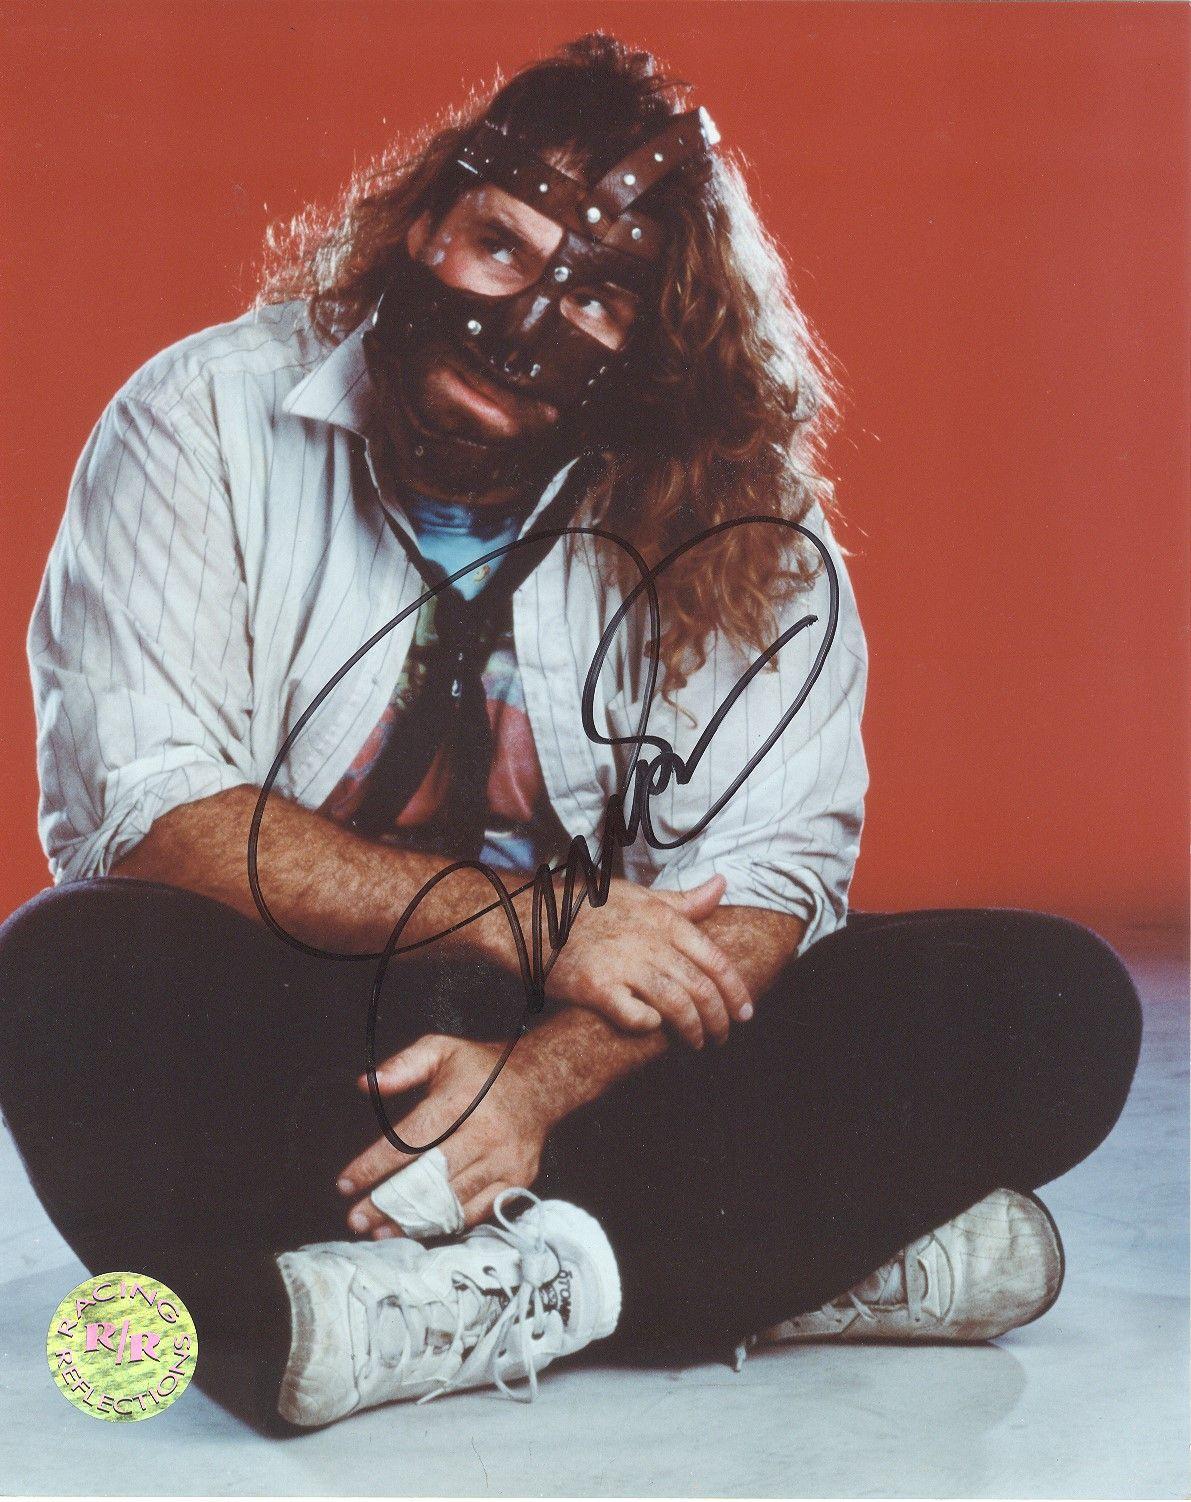 MICK FOLEY image Mankind Photo HD wallpaper and background photo